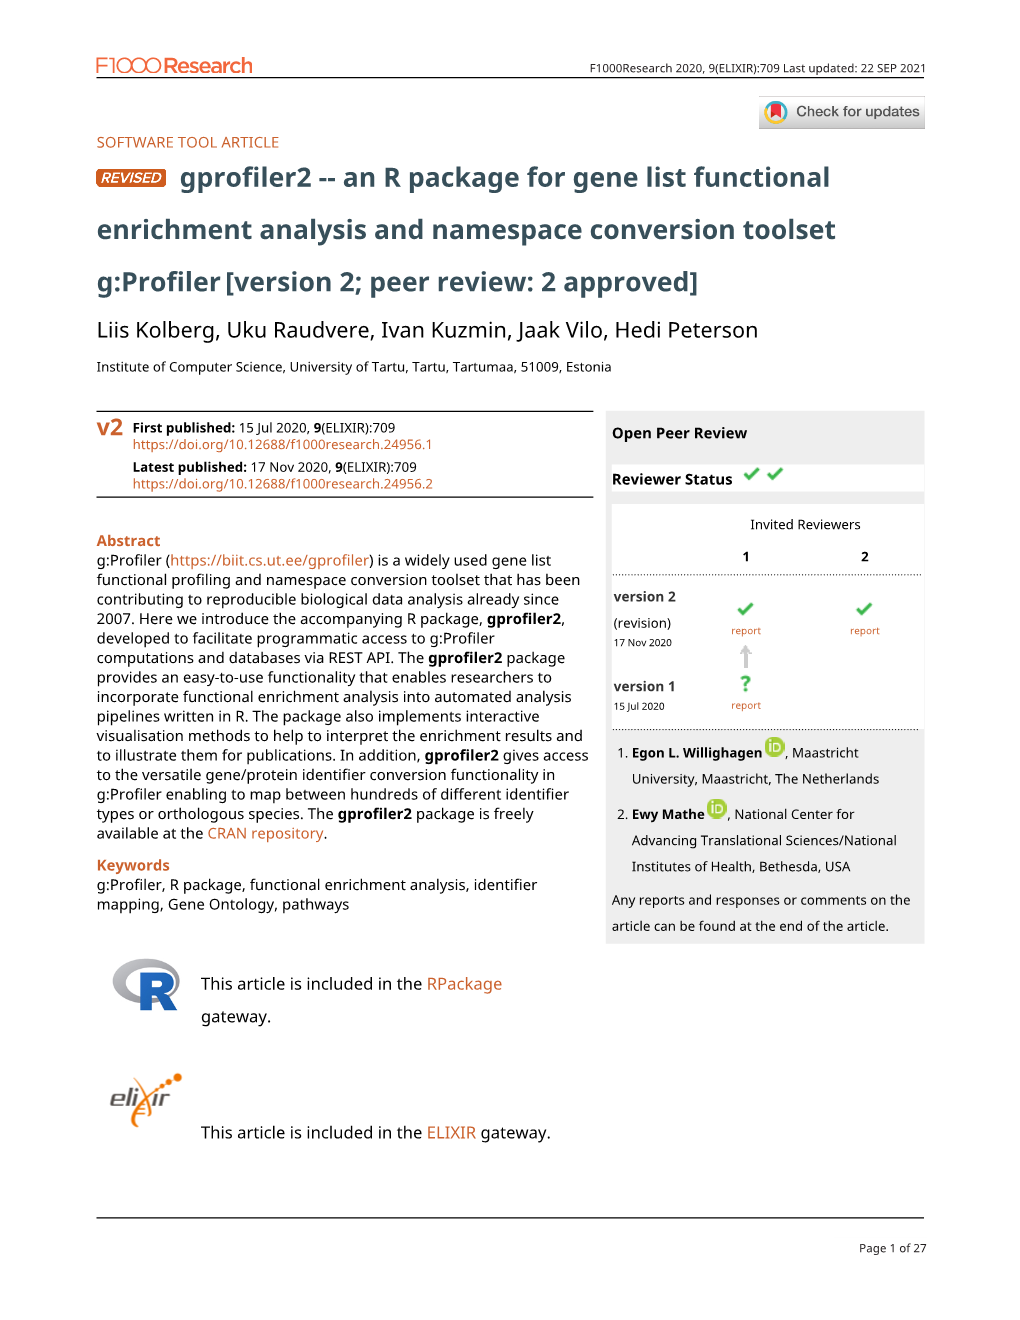 Gprofiler2 -- an R Package for Gene List Functional Enrichment Analysis and Namespace Conversion Toolset G:Profiler [Version 2; Peer Review: 2 Approved]